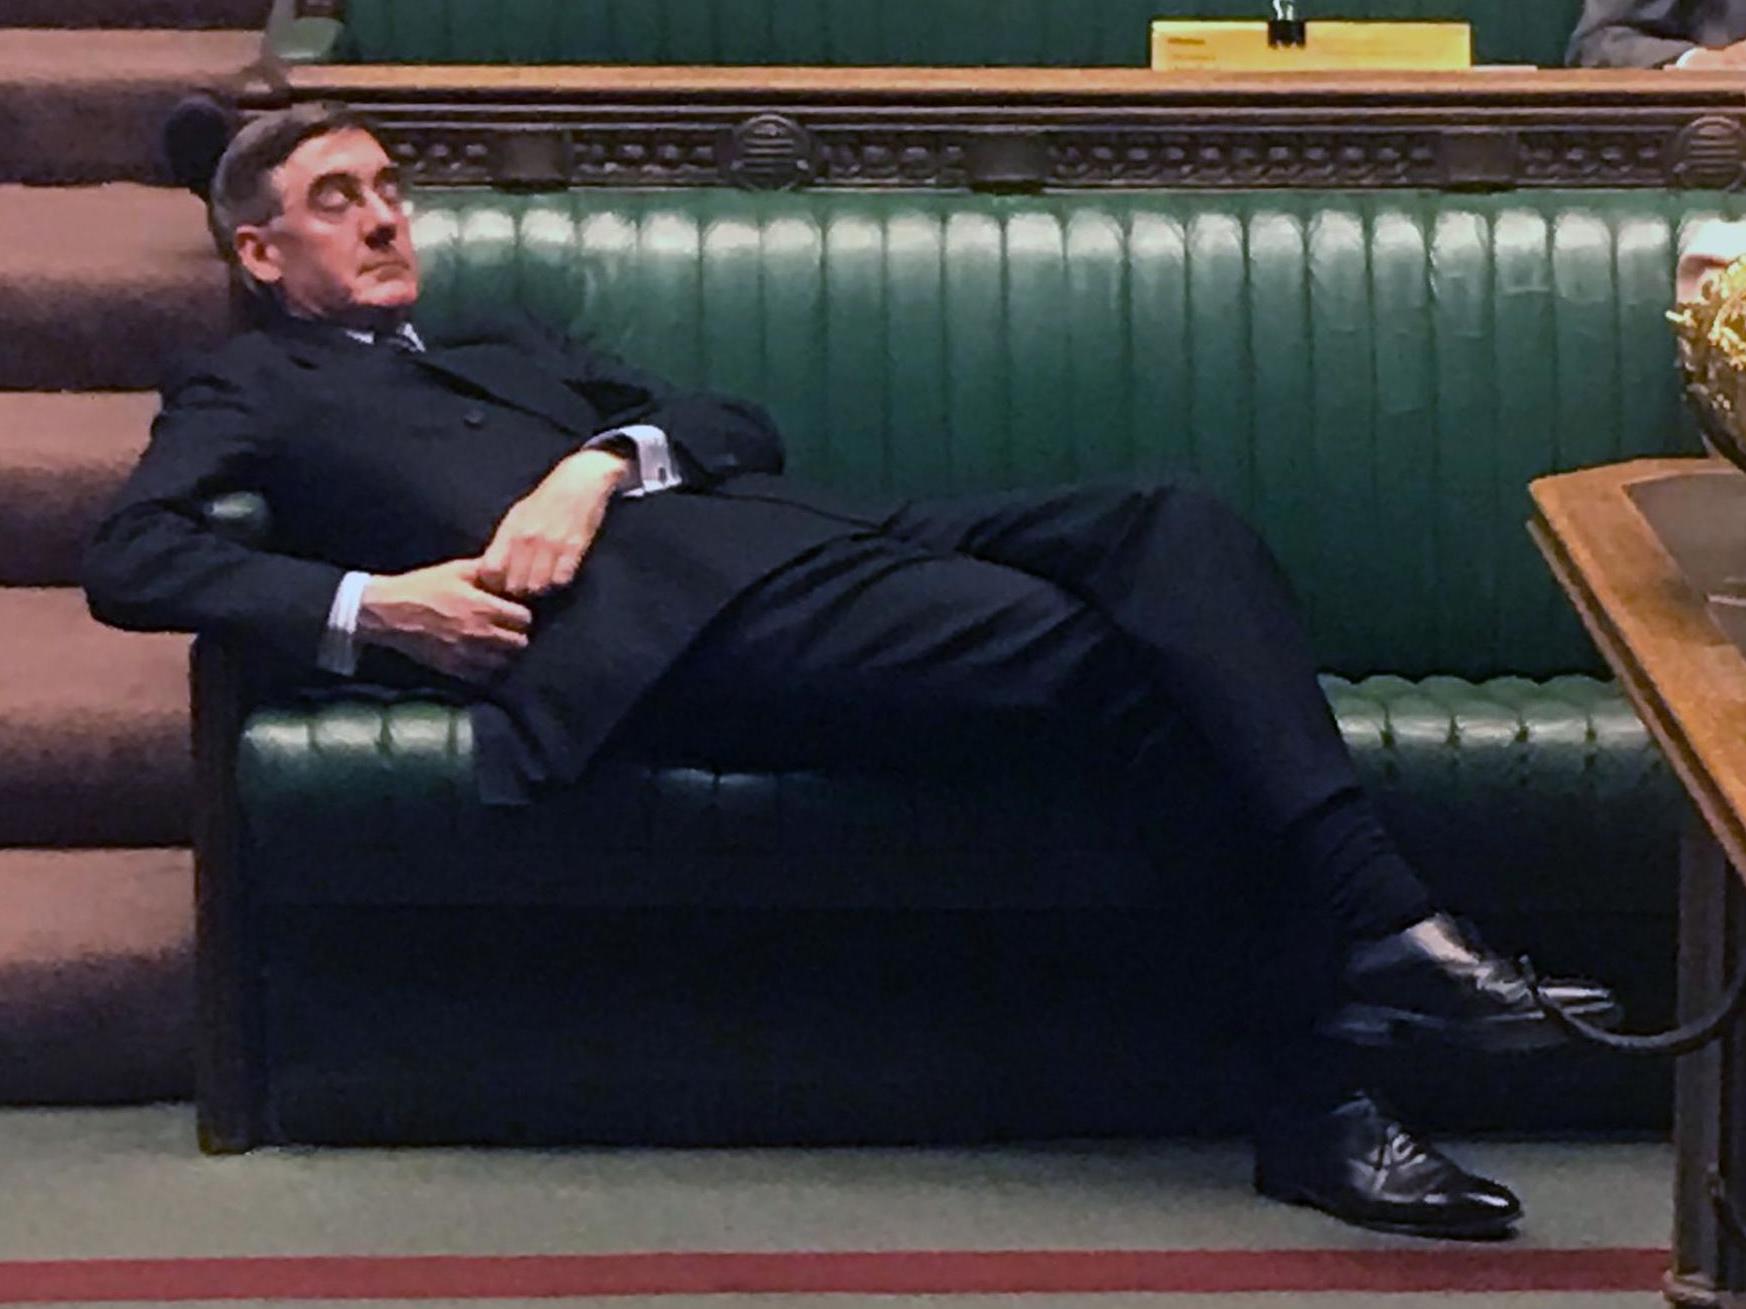 No slouch: Jacob Rees-Mogg has received almost £17,000 compensation for a ministerial role he was in for just 49 days